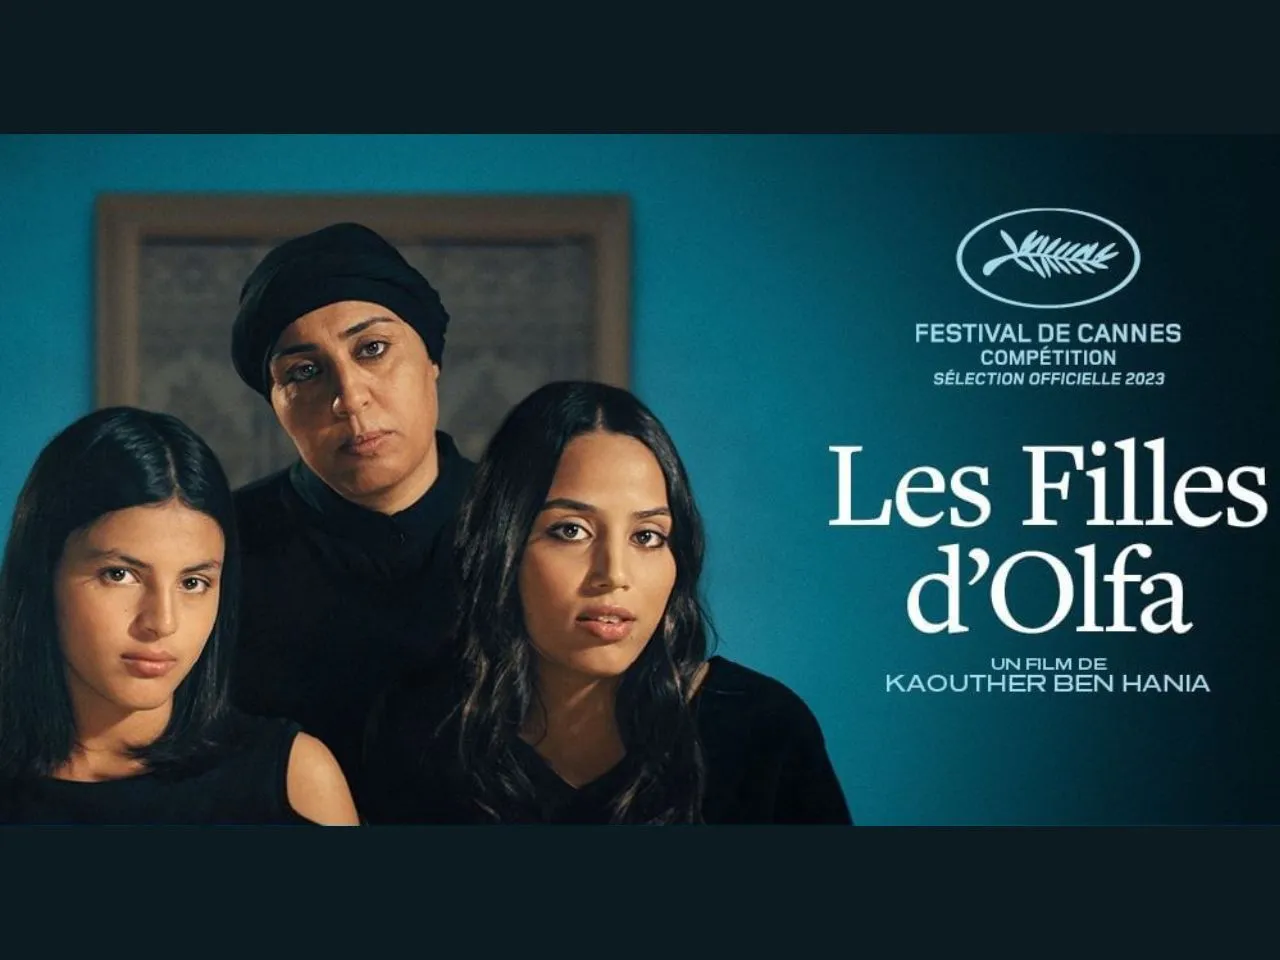 Four Daughters review: A responsible and crucial documentary on religious radicalisation in Tunisia